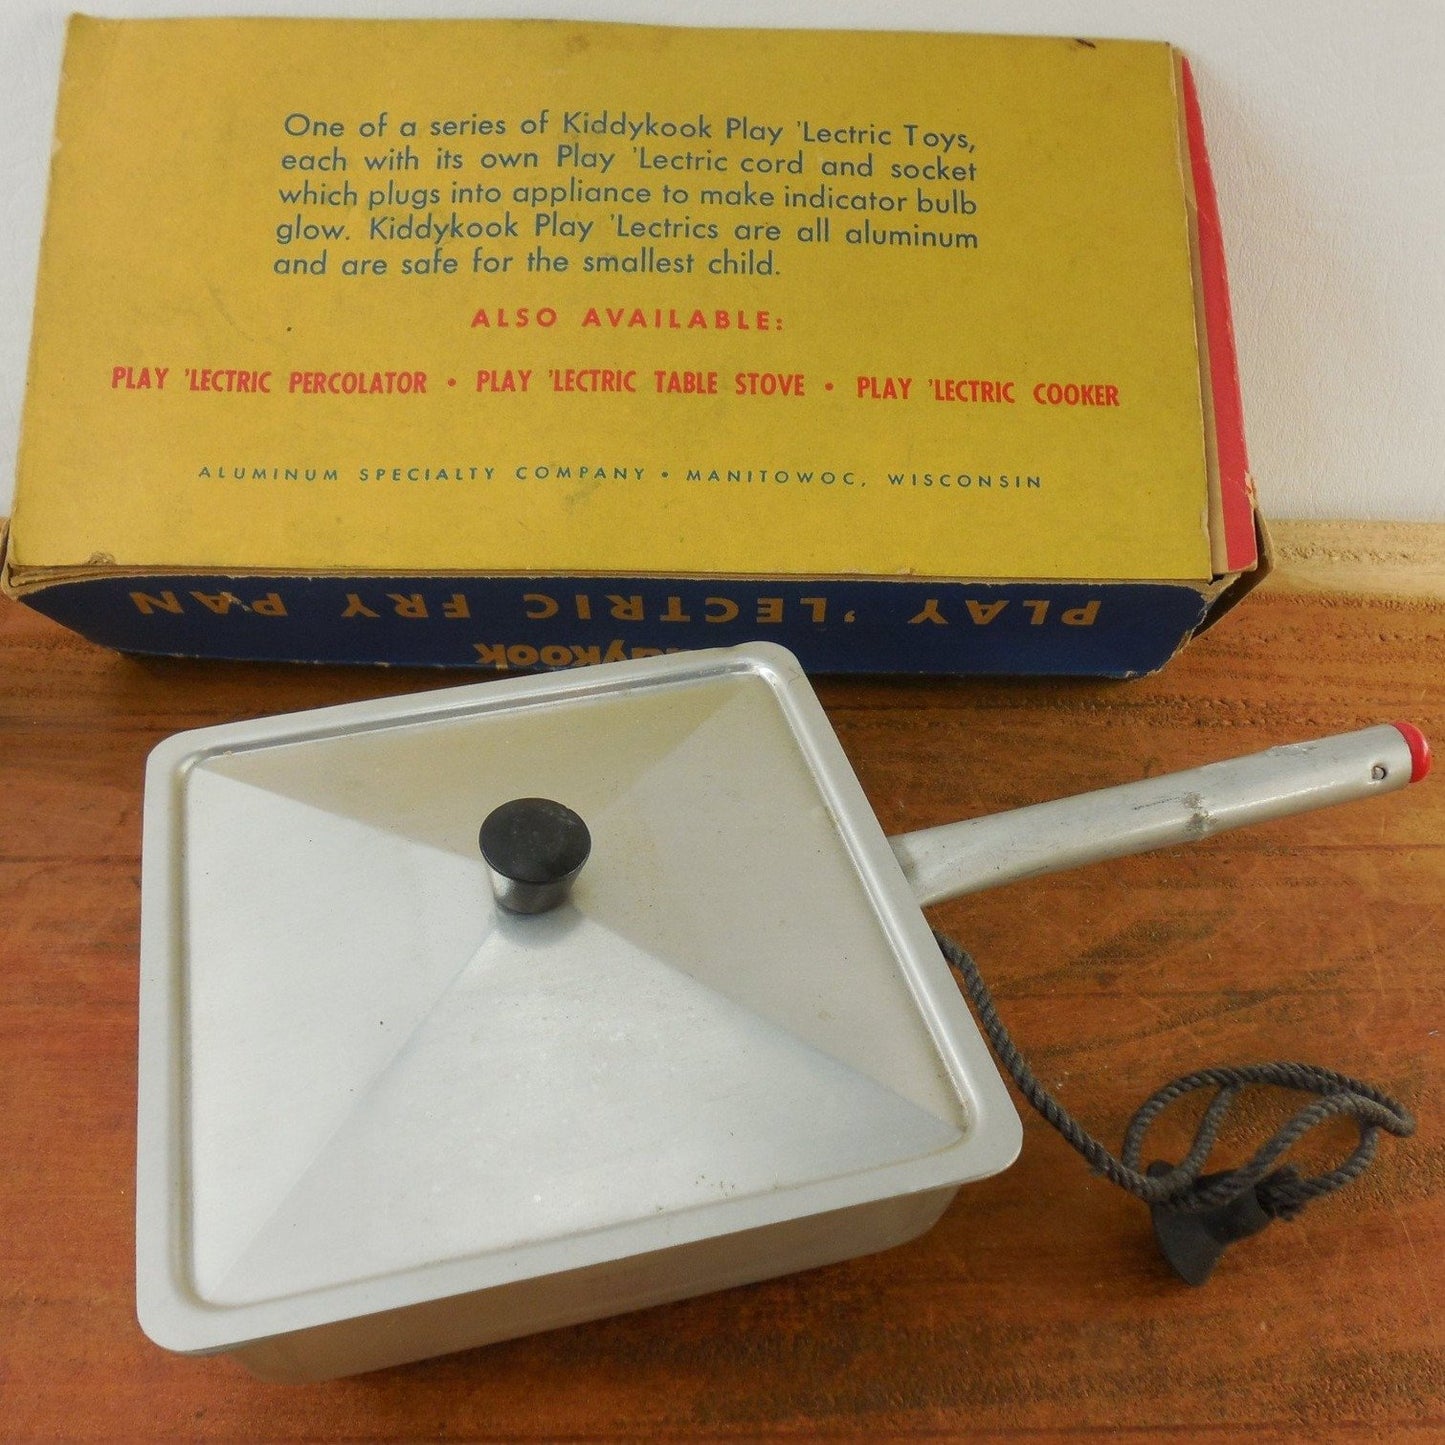 Vintage Kiddykook Play 'Lectric Child's Fry Pan Electric Skillet - Out of Box View